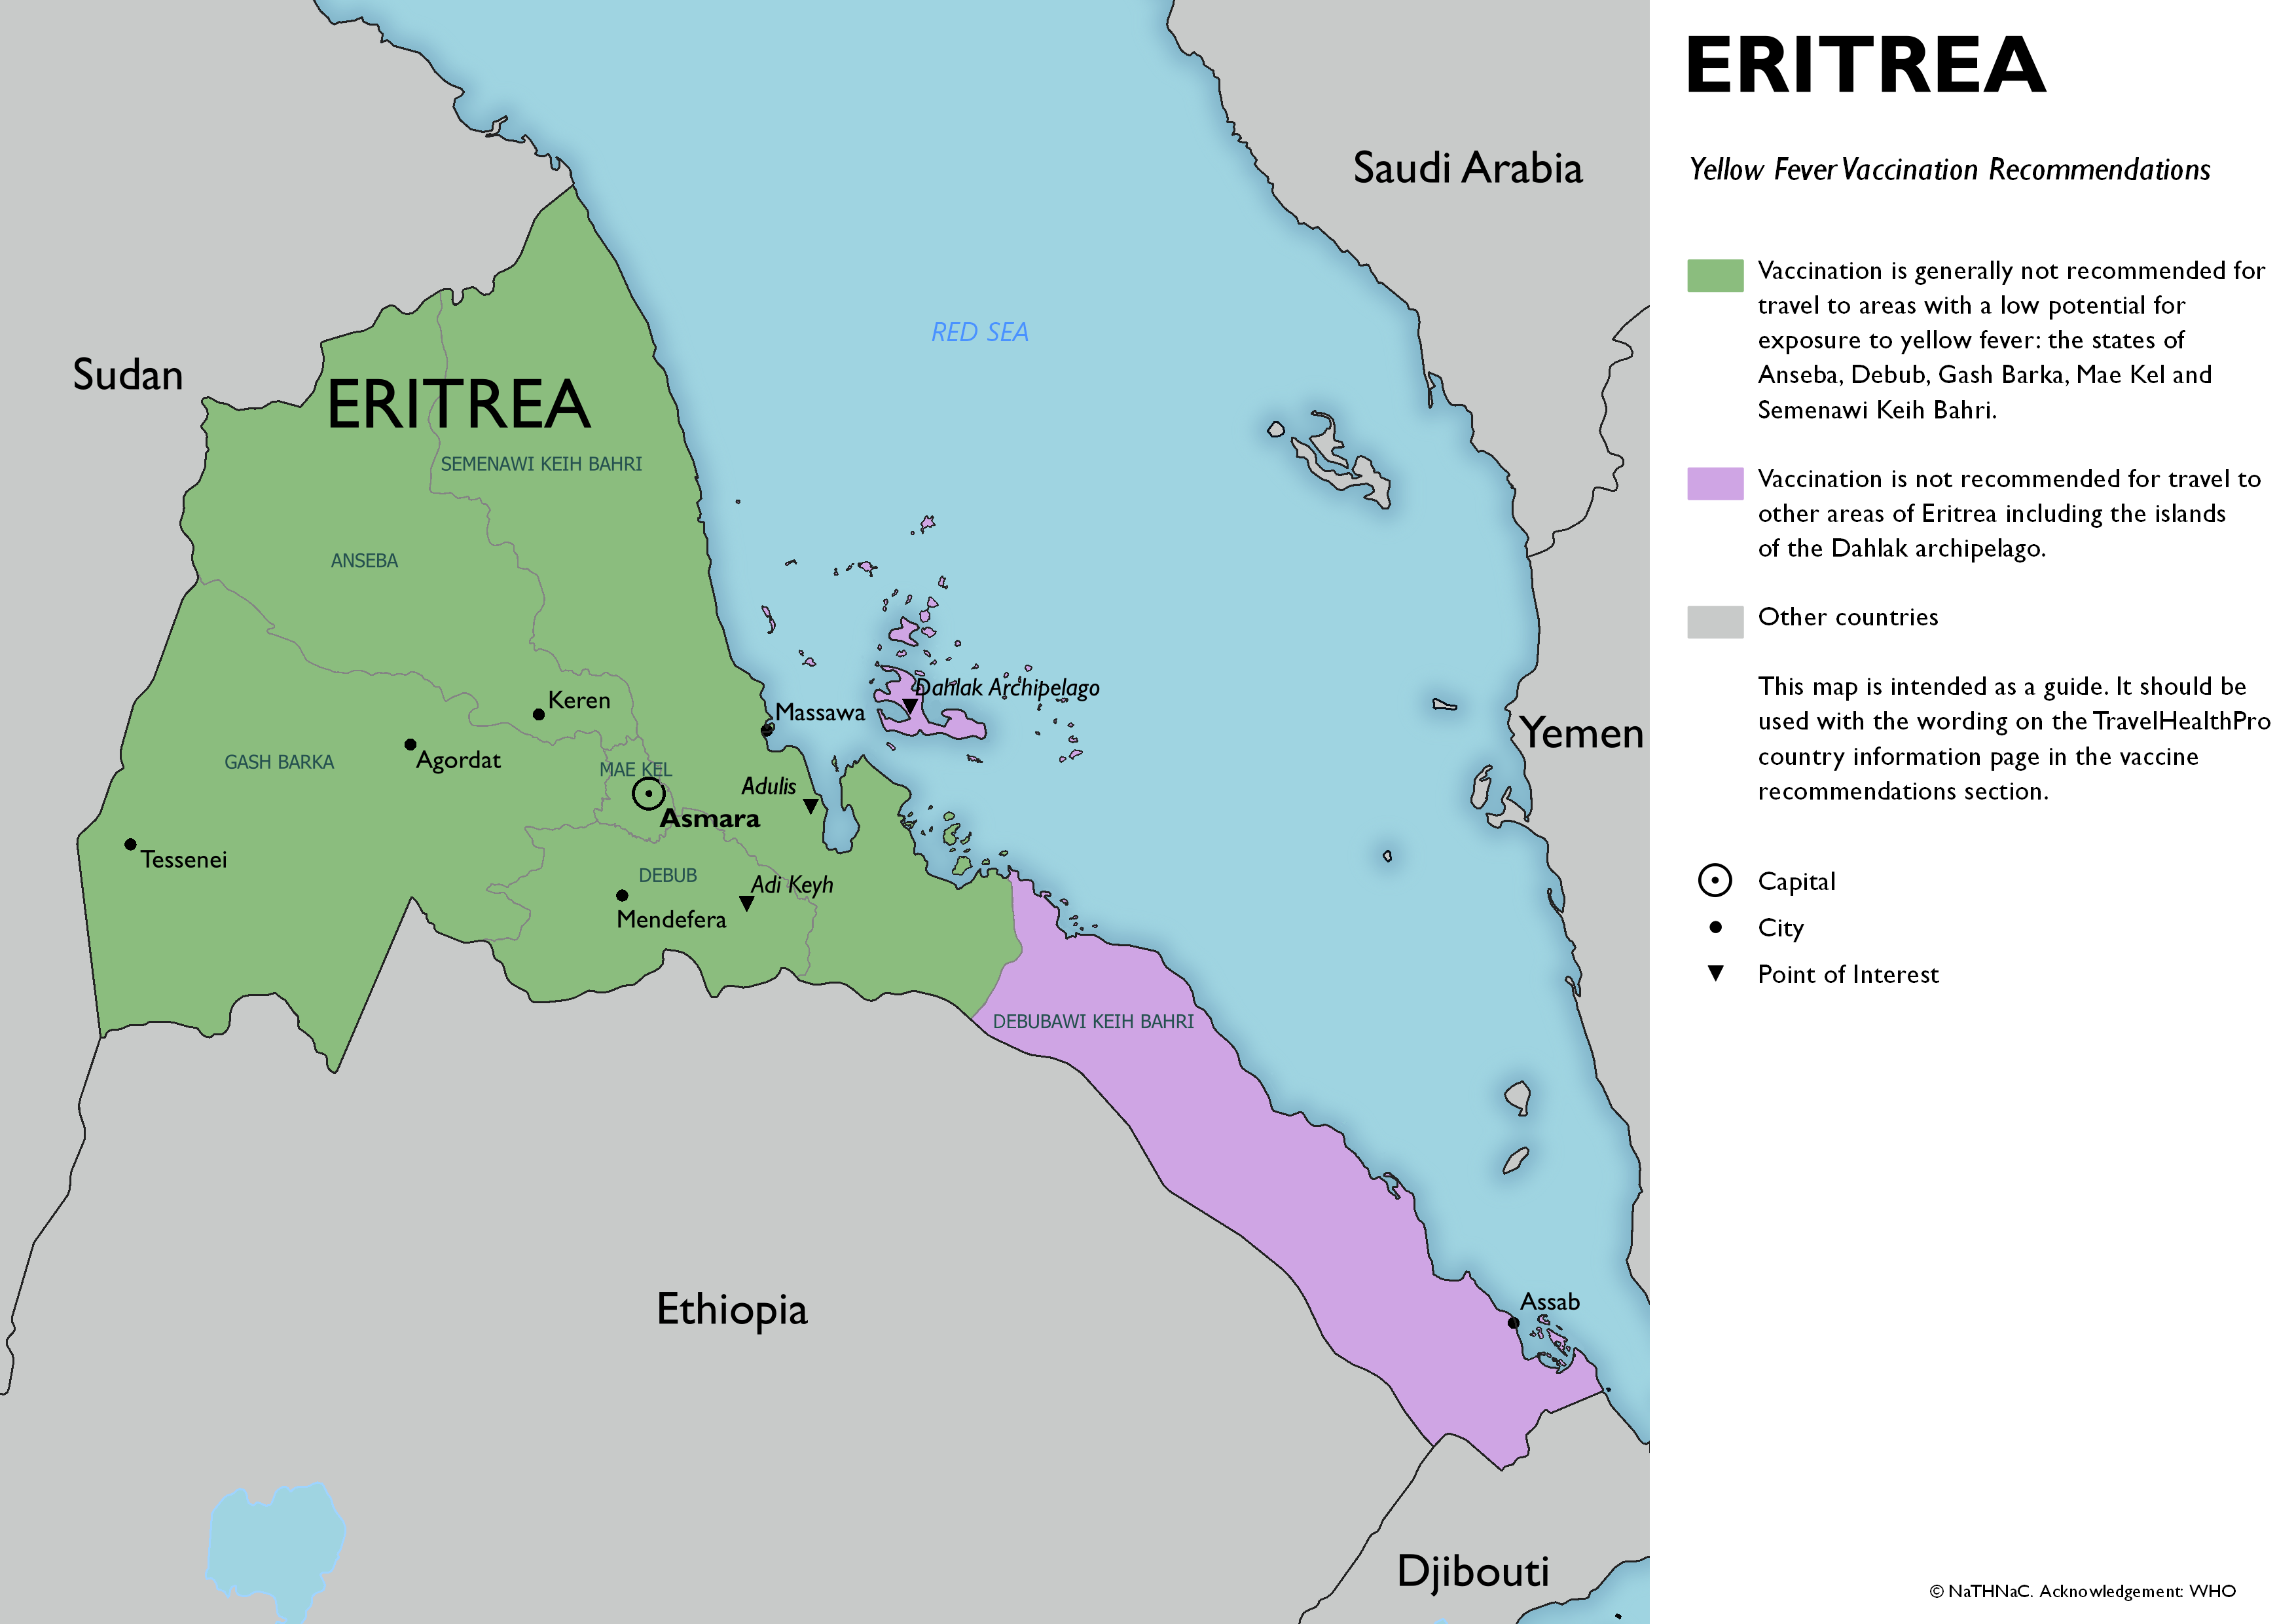 Yellow fever vaccine recommendation map for Eritrea